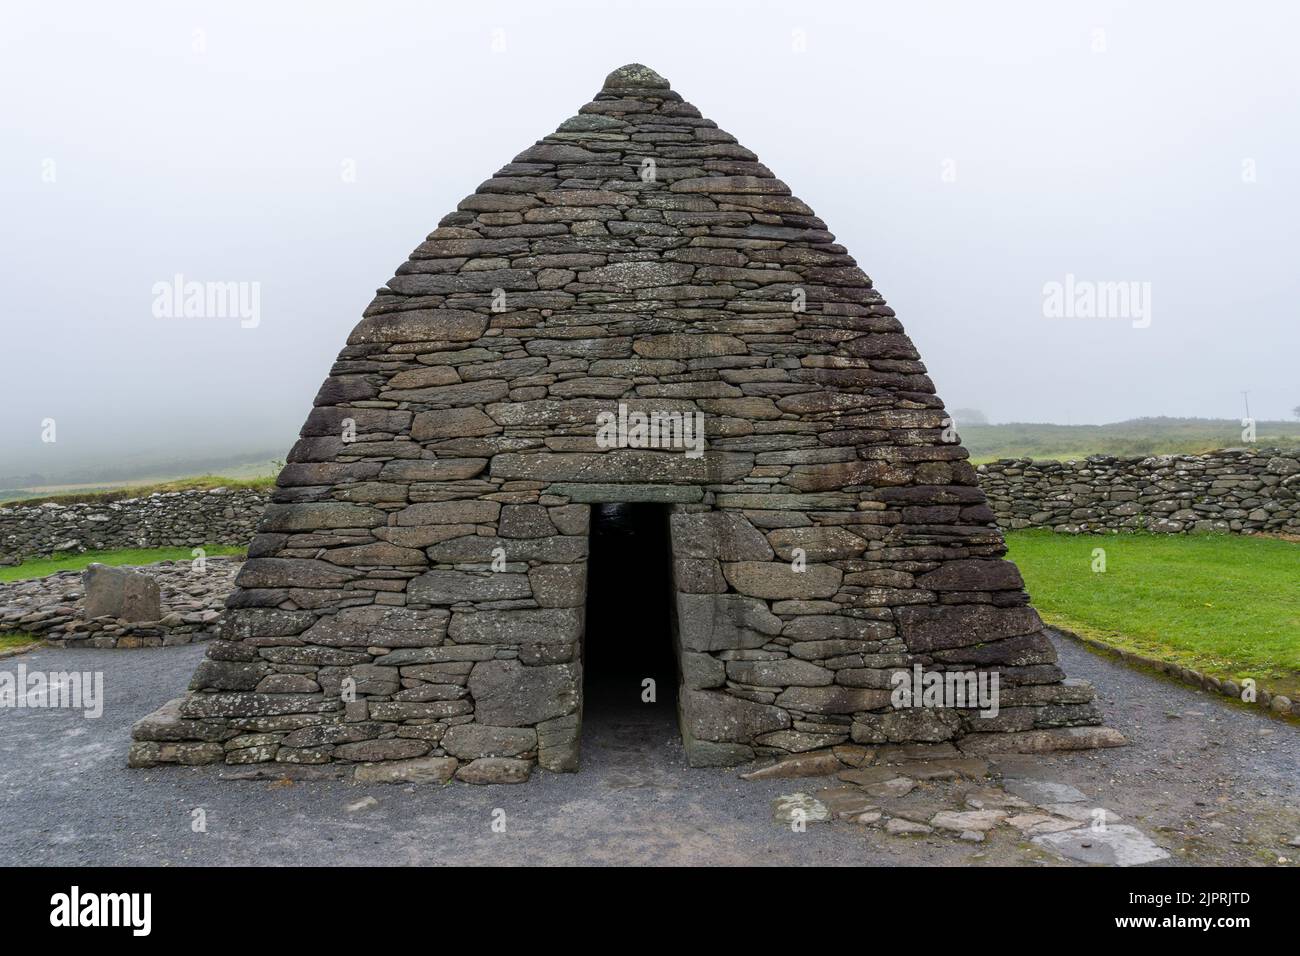 A close-up view of the early-Chrisitian stone church Gallarus Oratory in County Kerry of Western Ireland Stock Photo